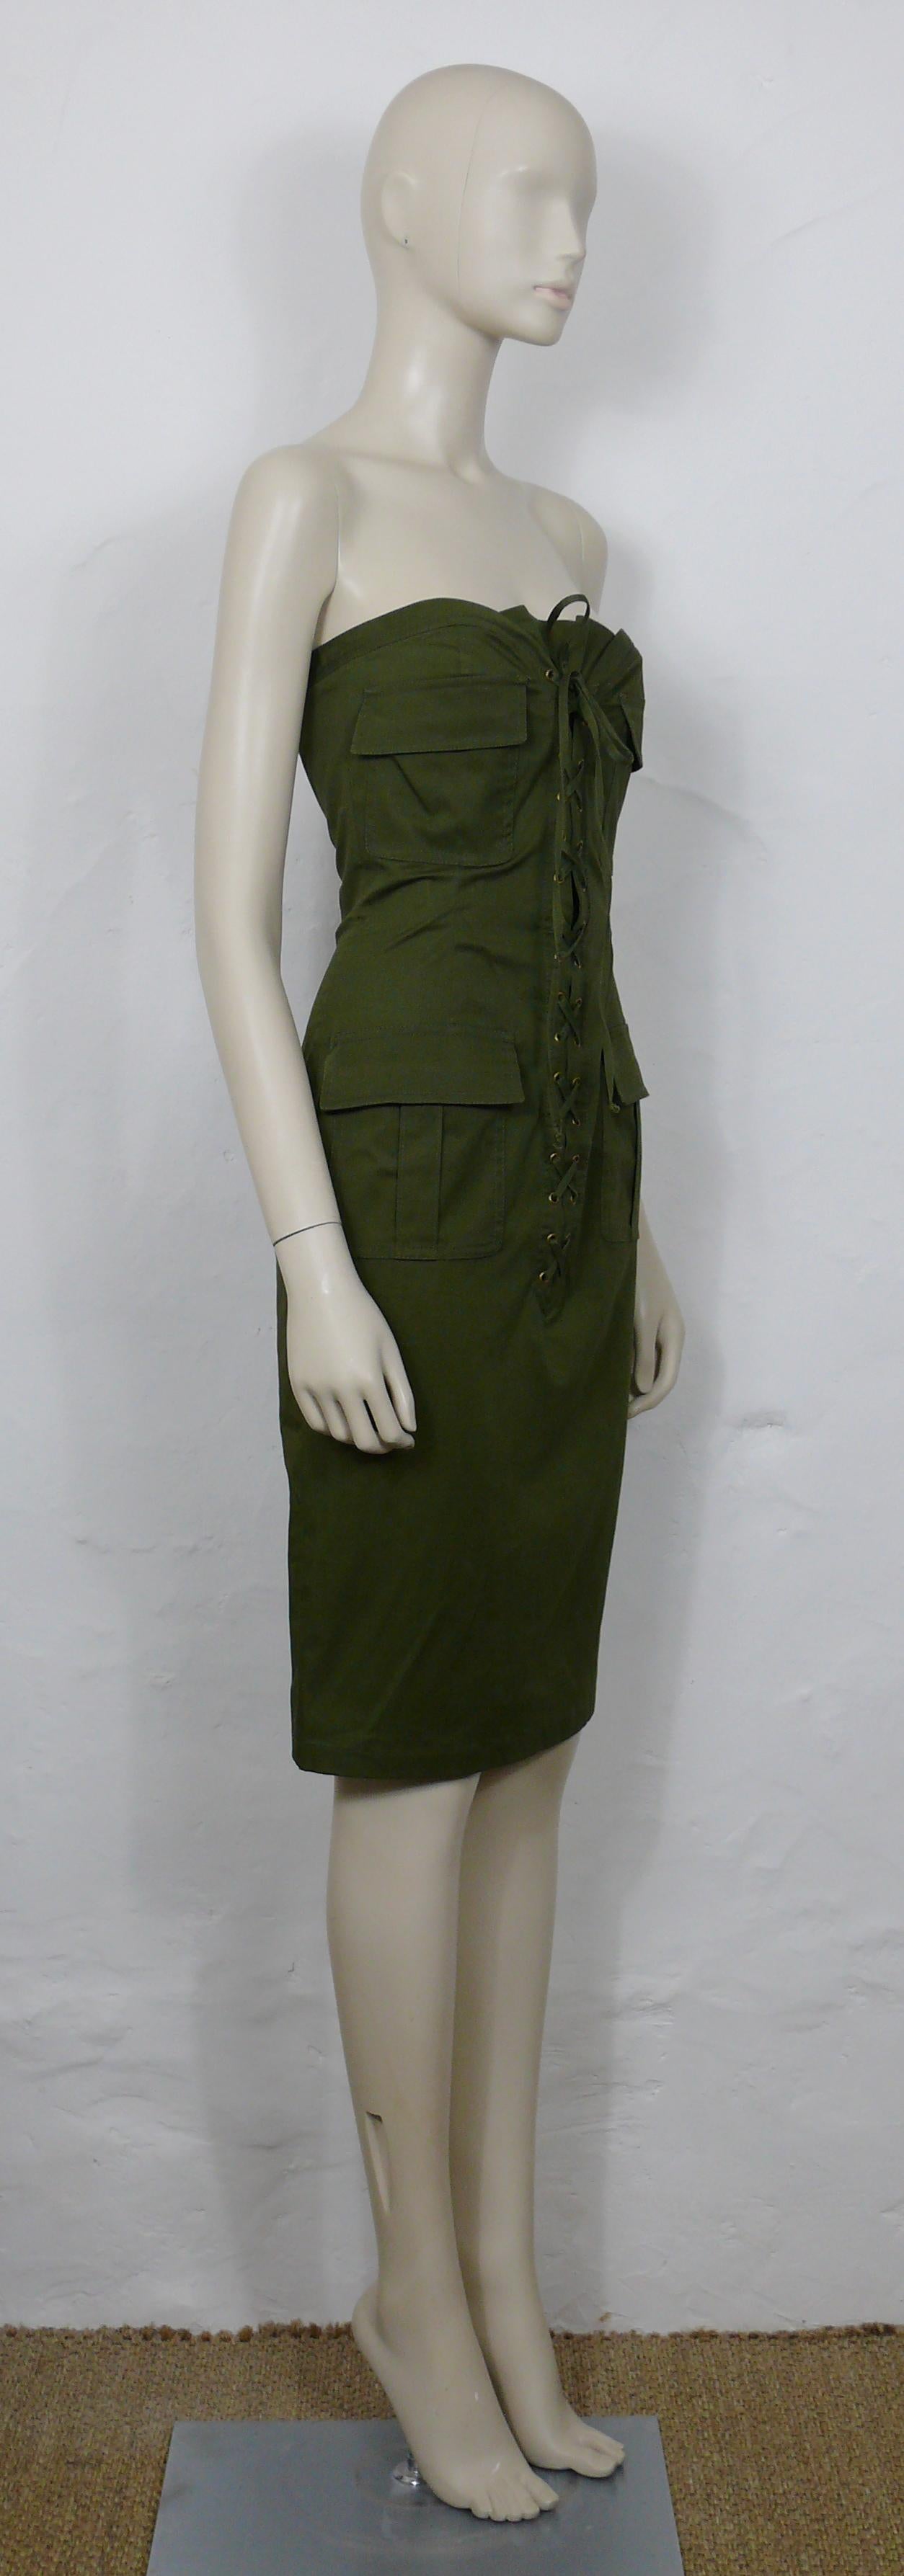 YVES SAINT LAURENT by TOM FORD khaki color strapless safari dress with a built in bustier bra.

This dress features :
- Khaki cotton blend fabric.
- Built in bustier bra.
- Four patch pockets.
- Front lacing.
- Side hidden zippered closure.
- Bronze